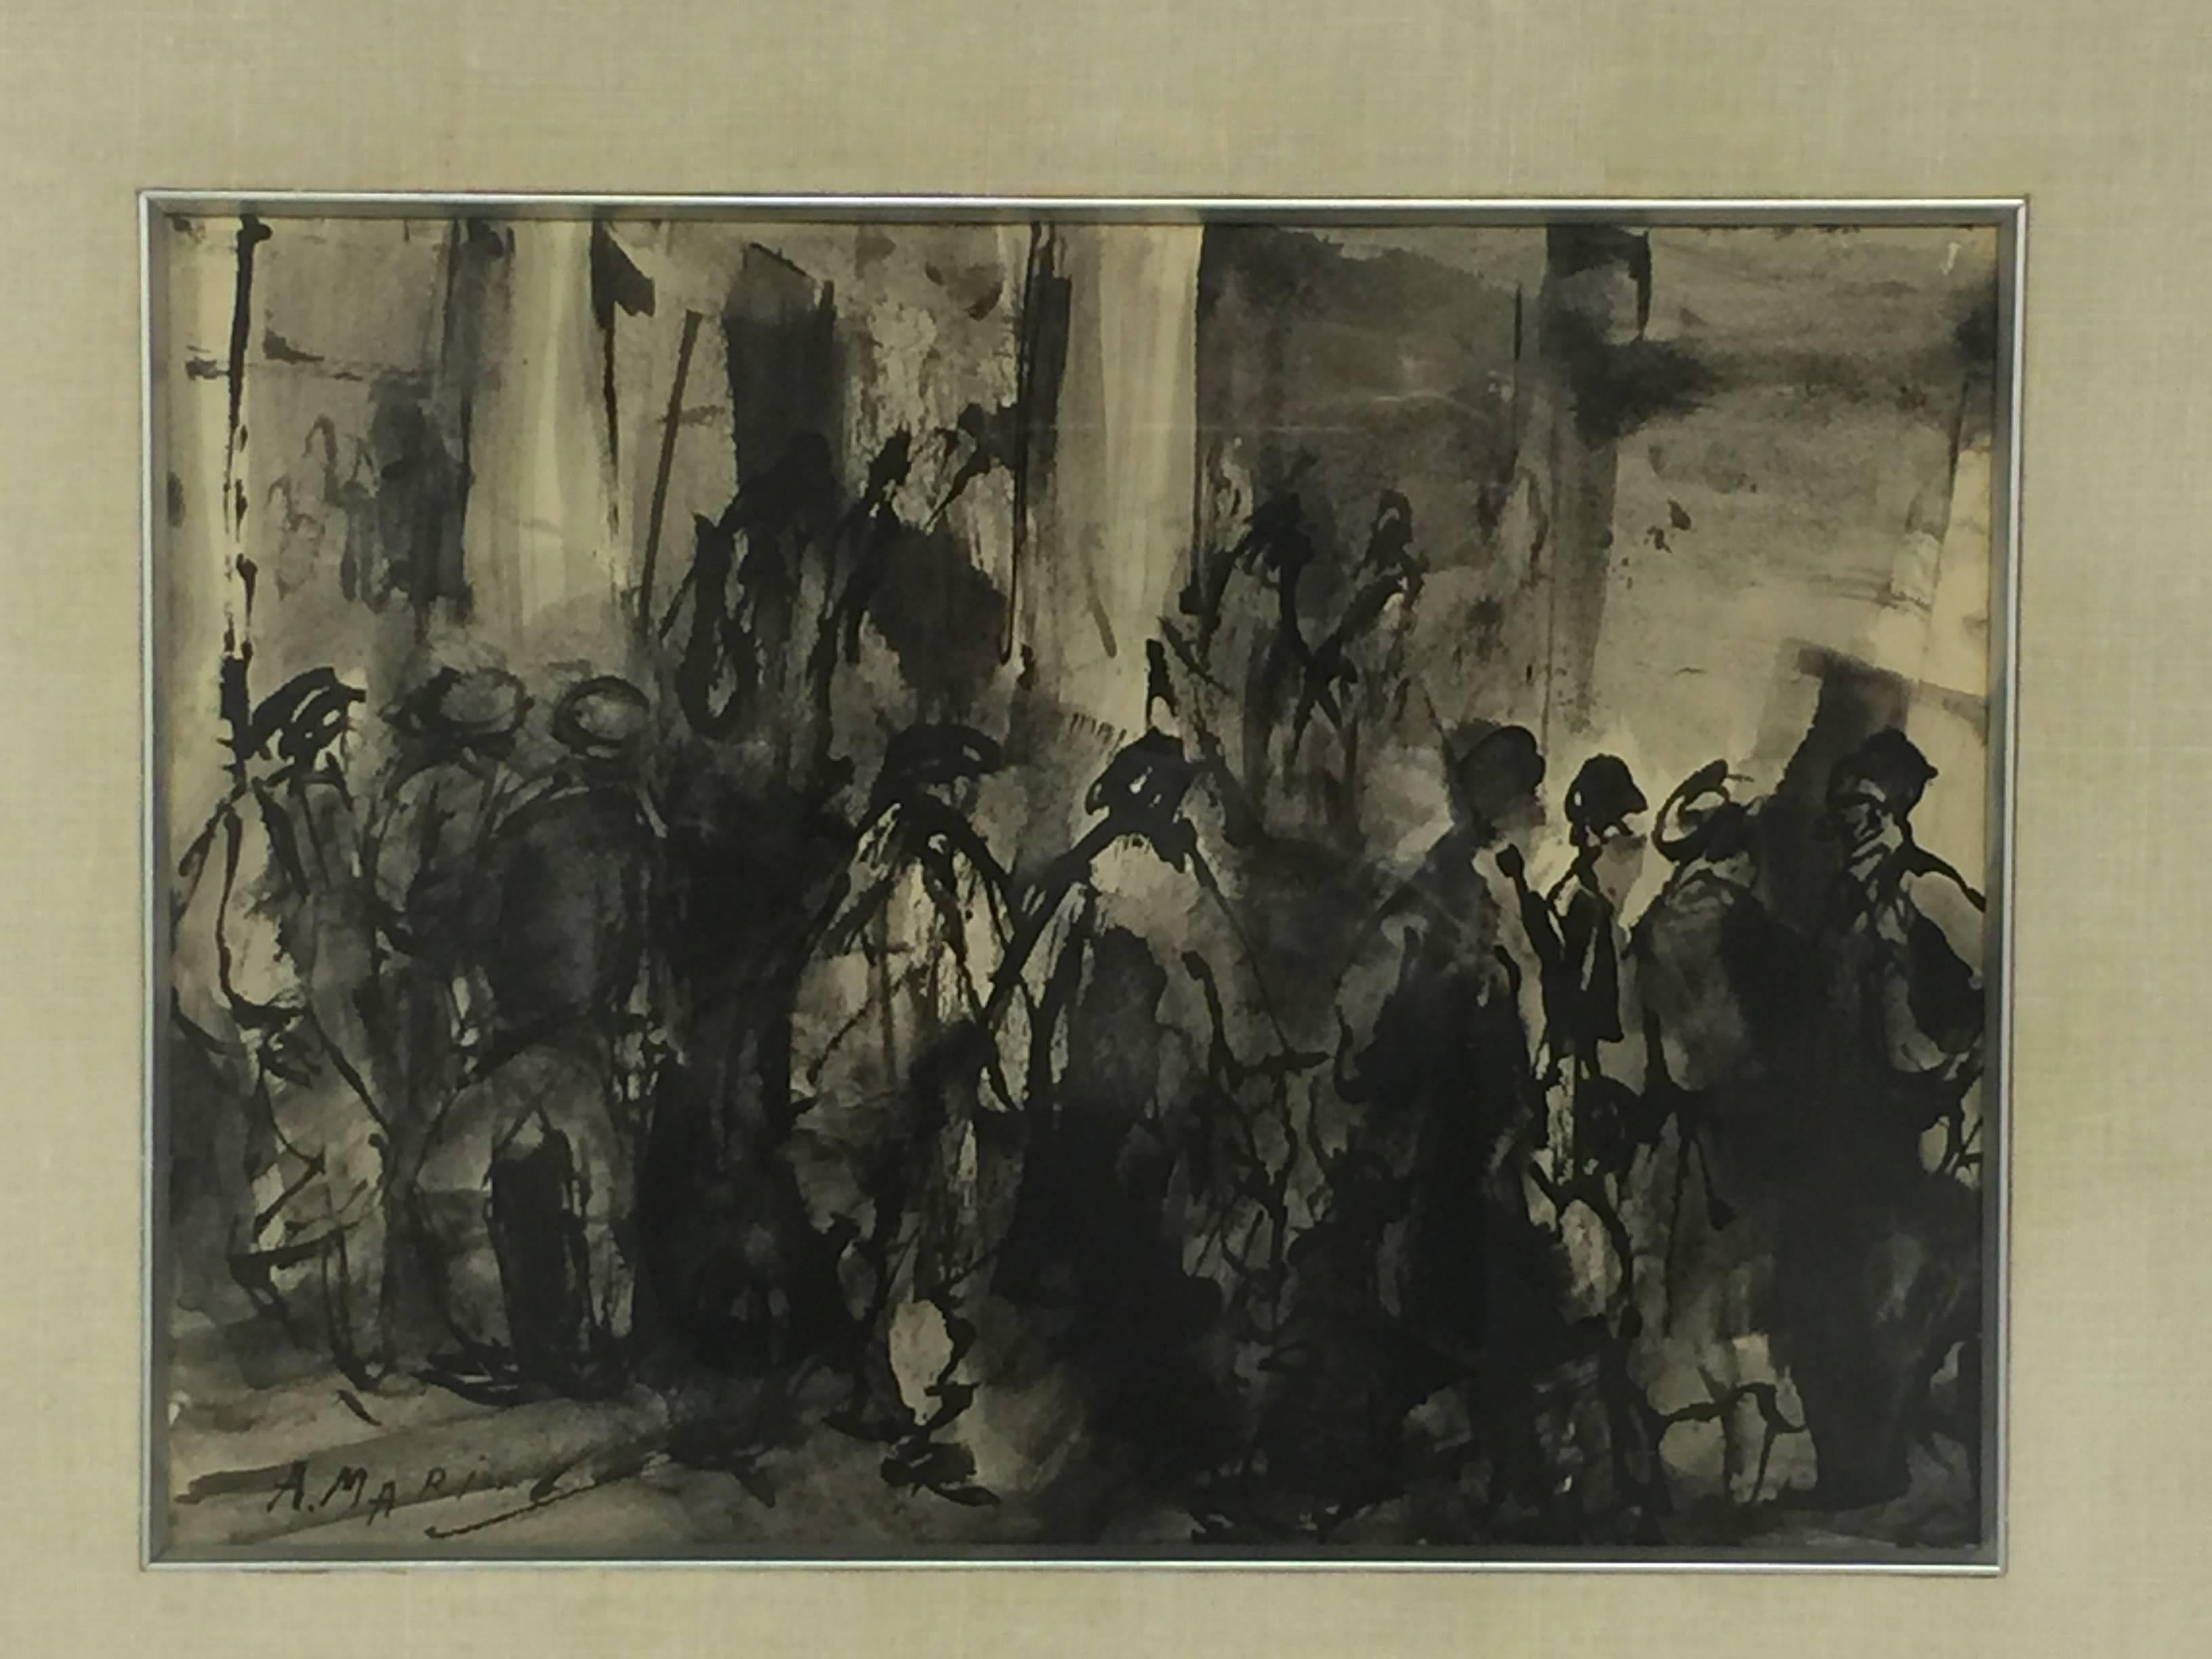 A watercolor work on paper depicting a crowded city sidewalk done in shades of grey and black. Signed indistinctly. The sight size of the painting is 12.63